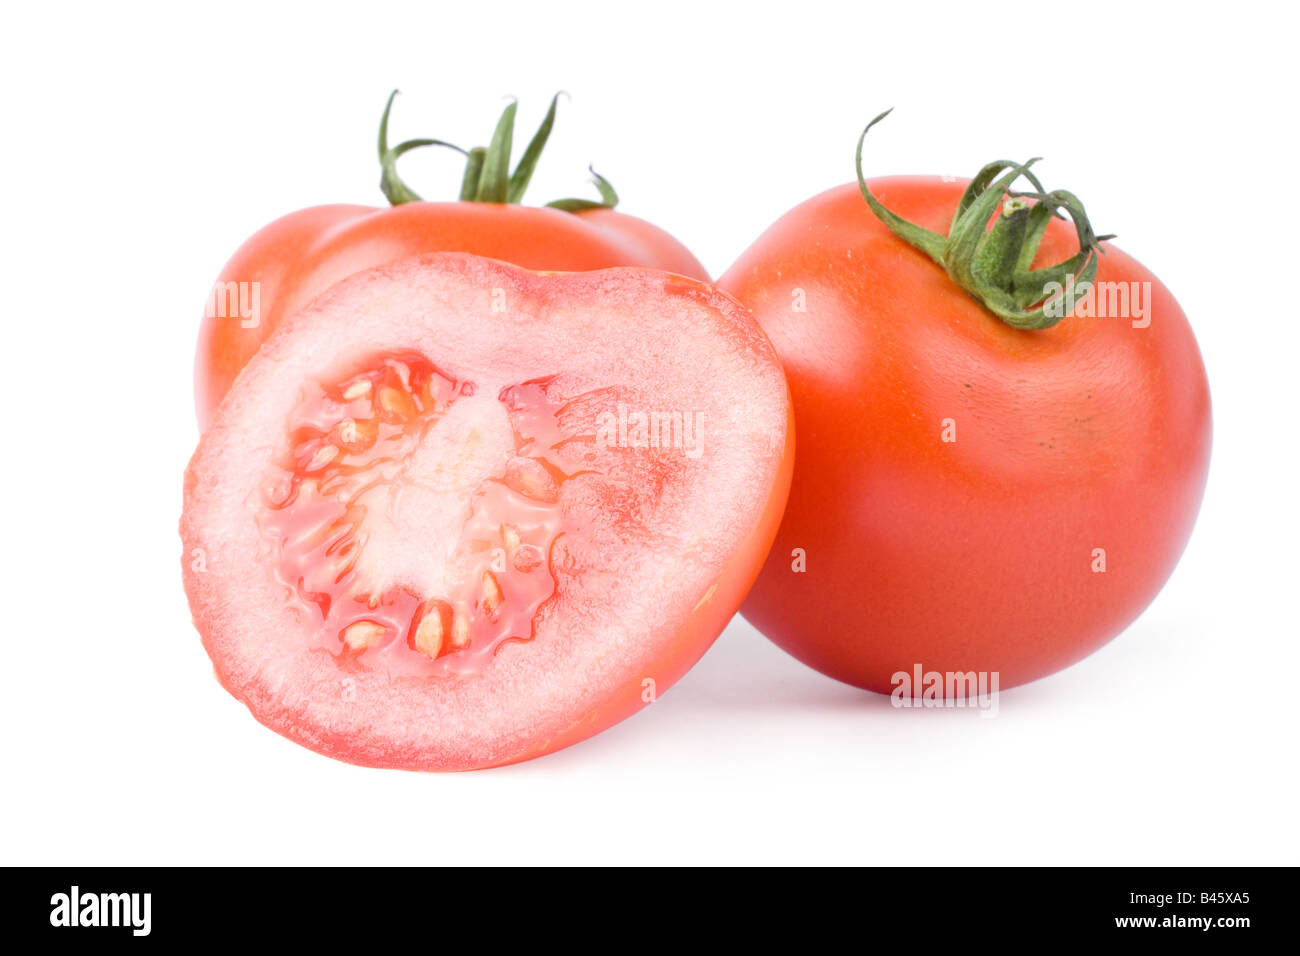 Ripe tomatoes isolated on a white background with one cut in half Stock Photo